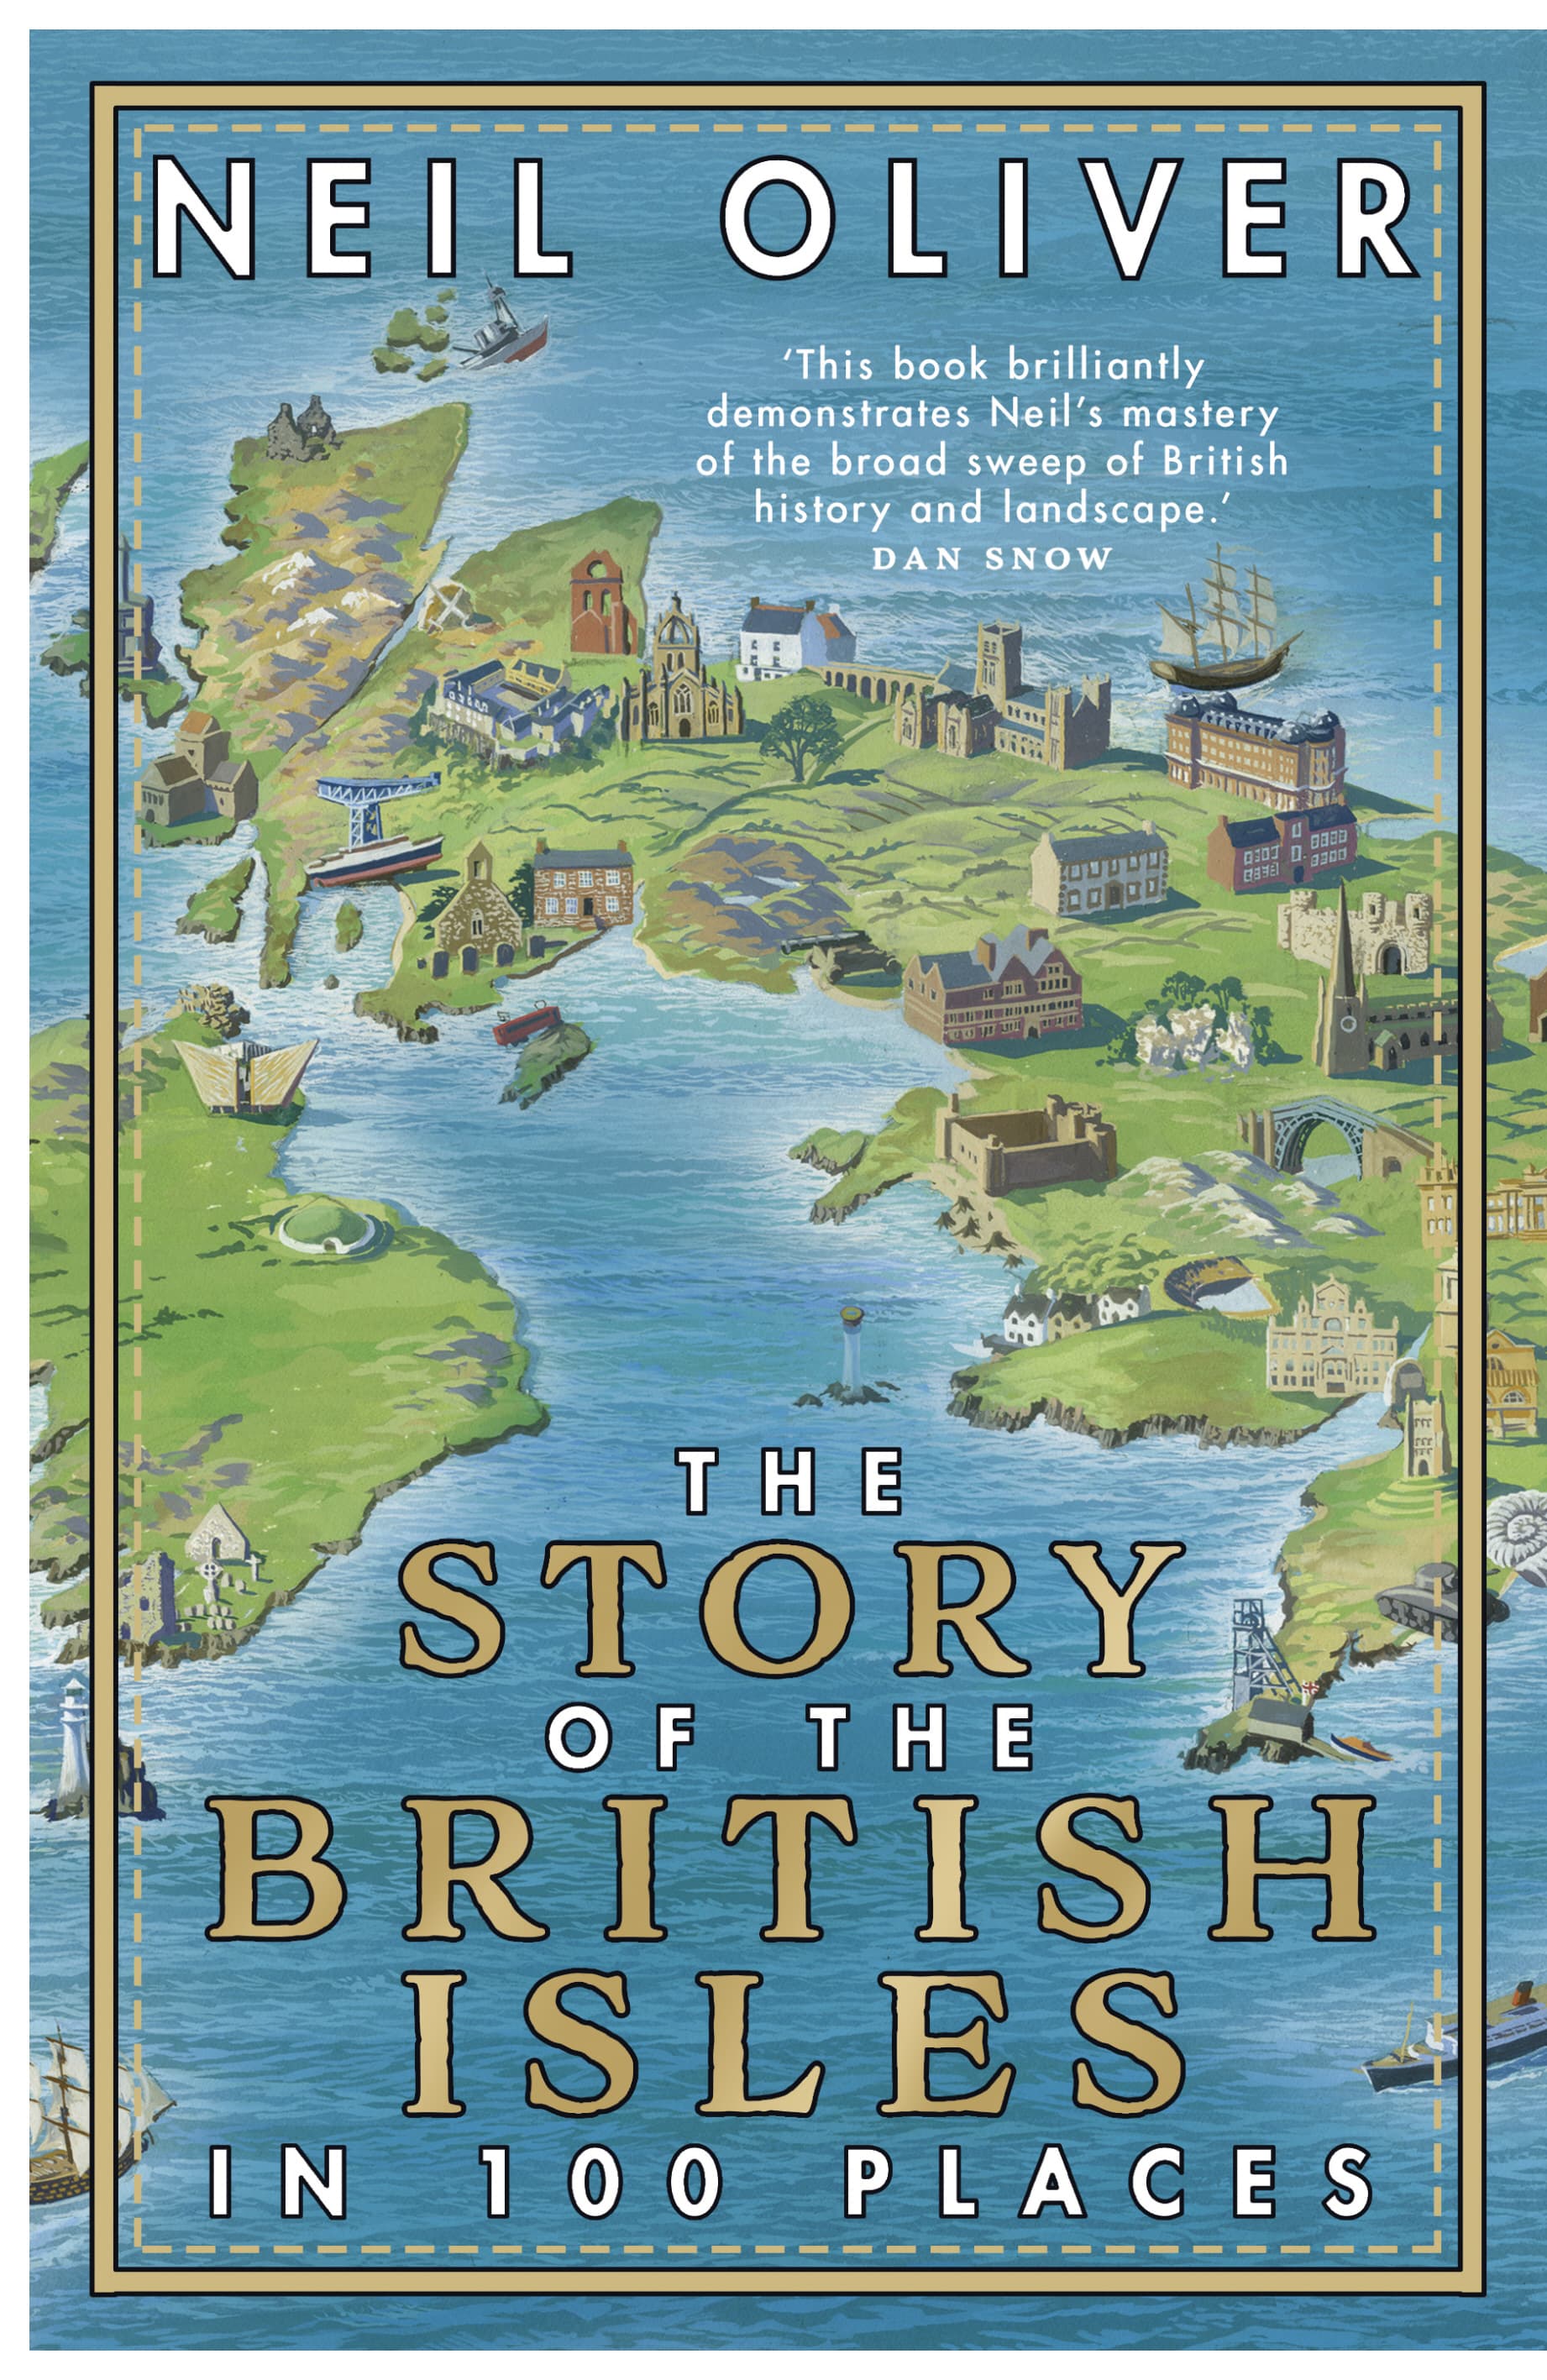 The story of the British isles in 100 places